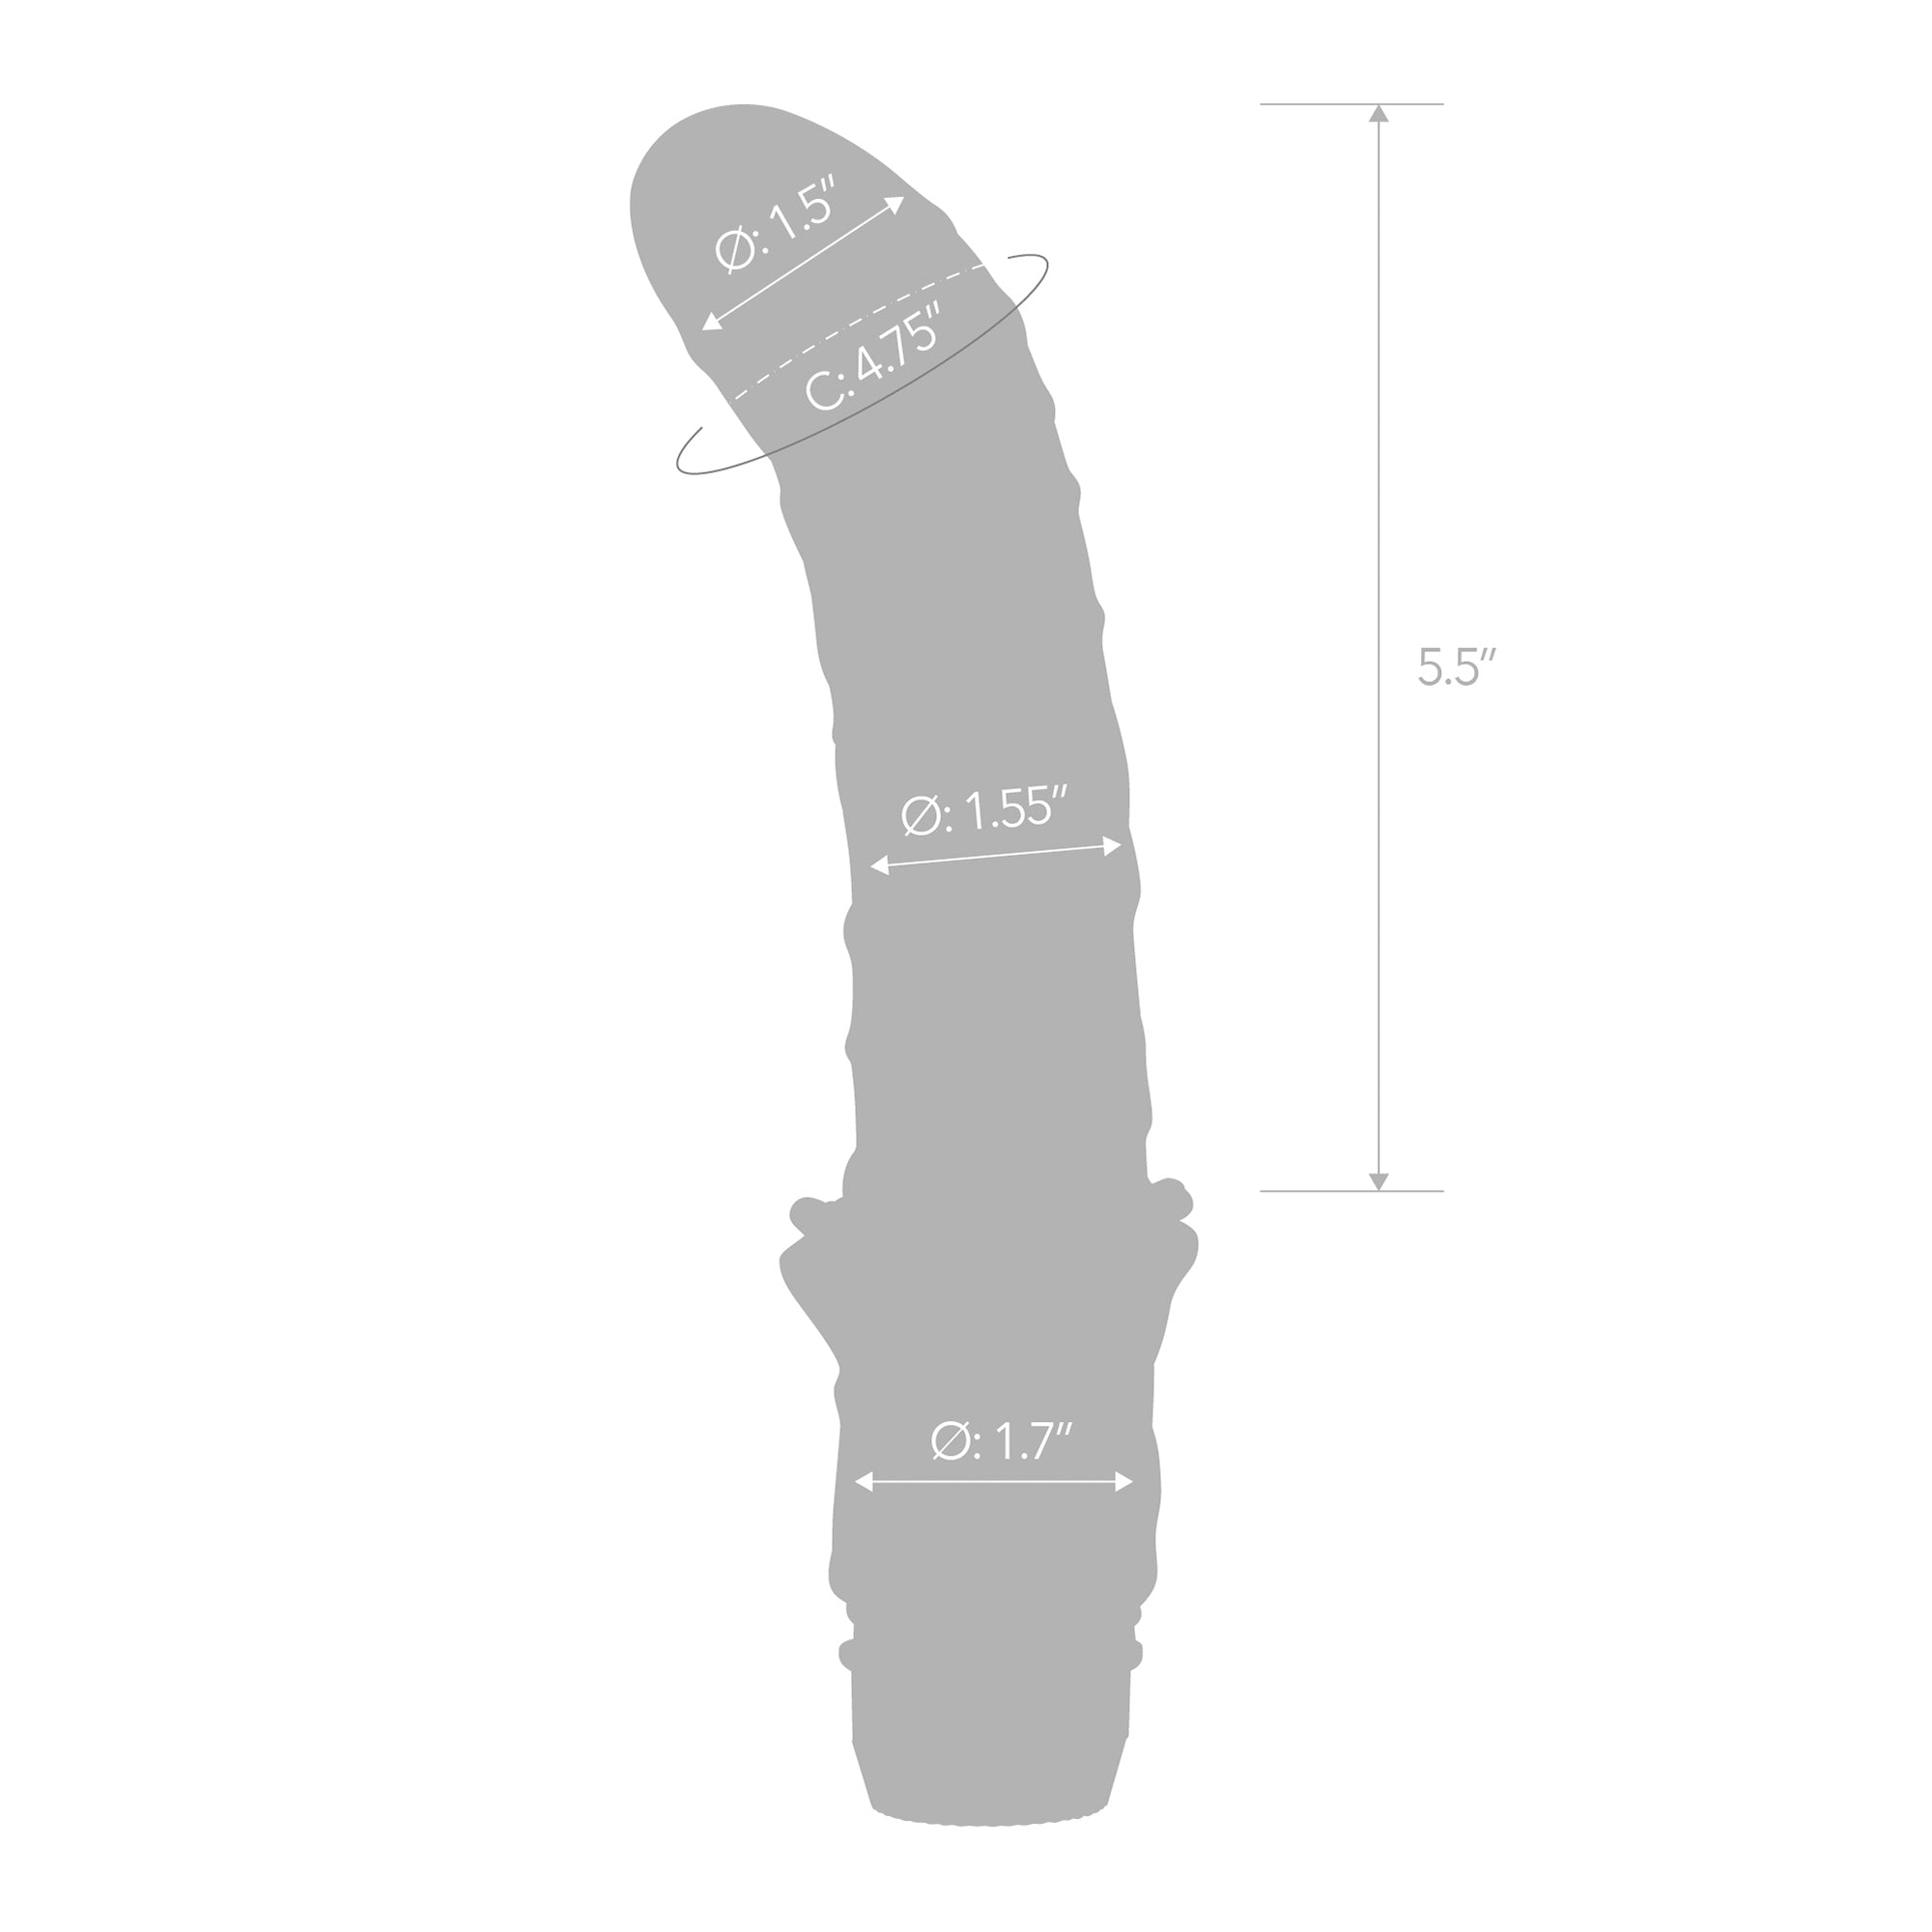 Specifications of Blue Line Men 6" Realistic Vibrating Curved P-Spot Massager with Veins at glastoy.com